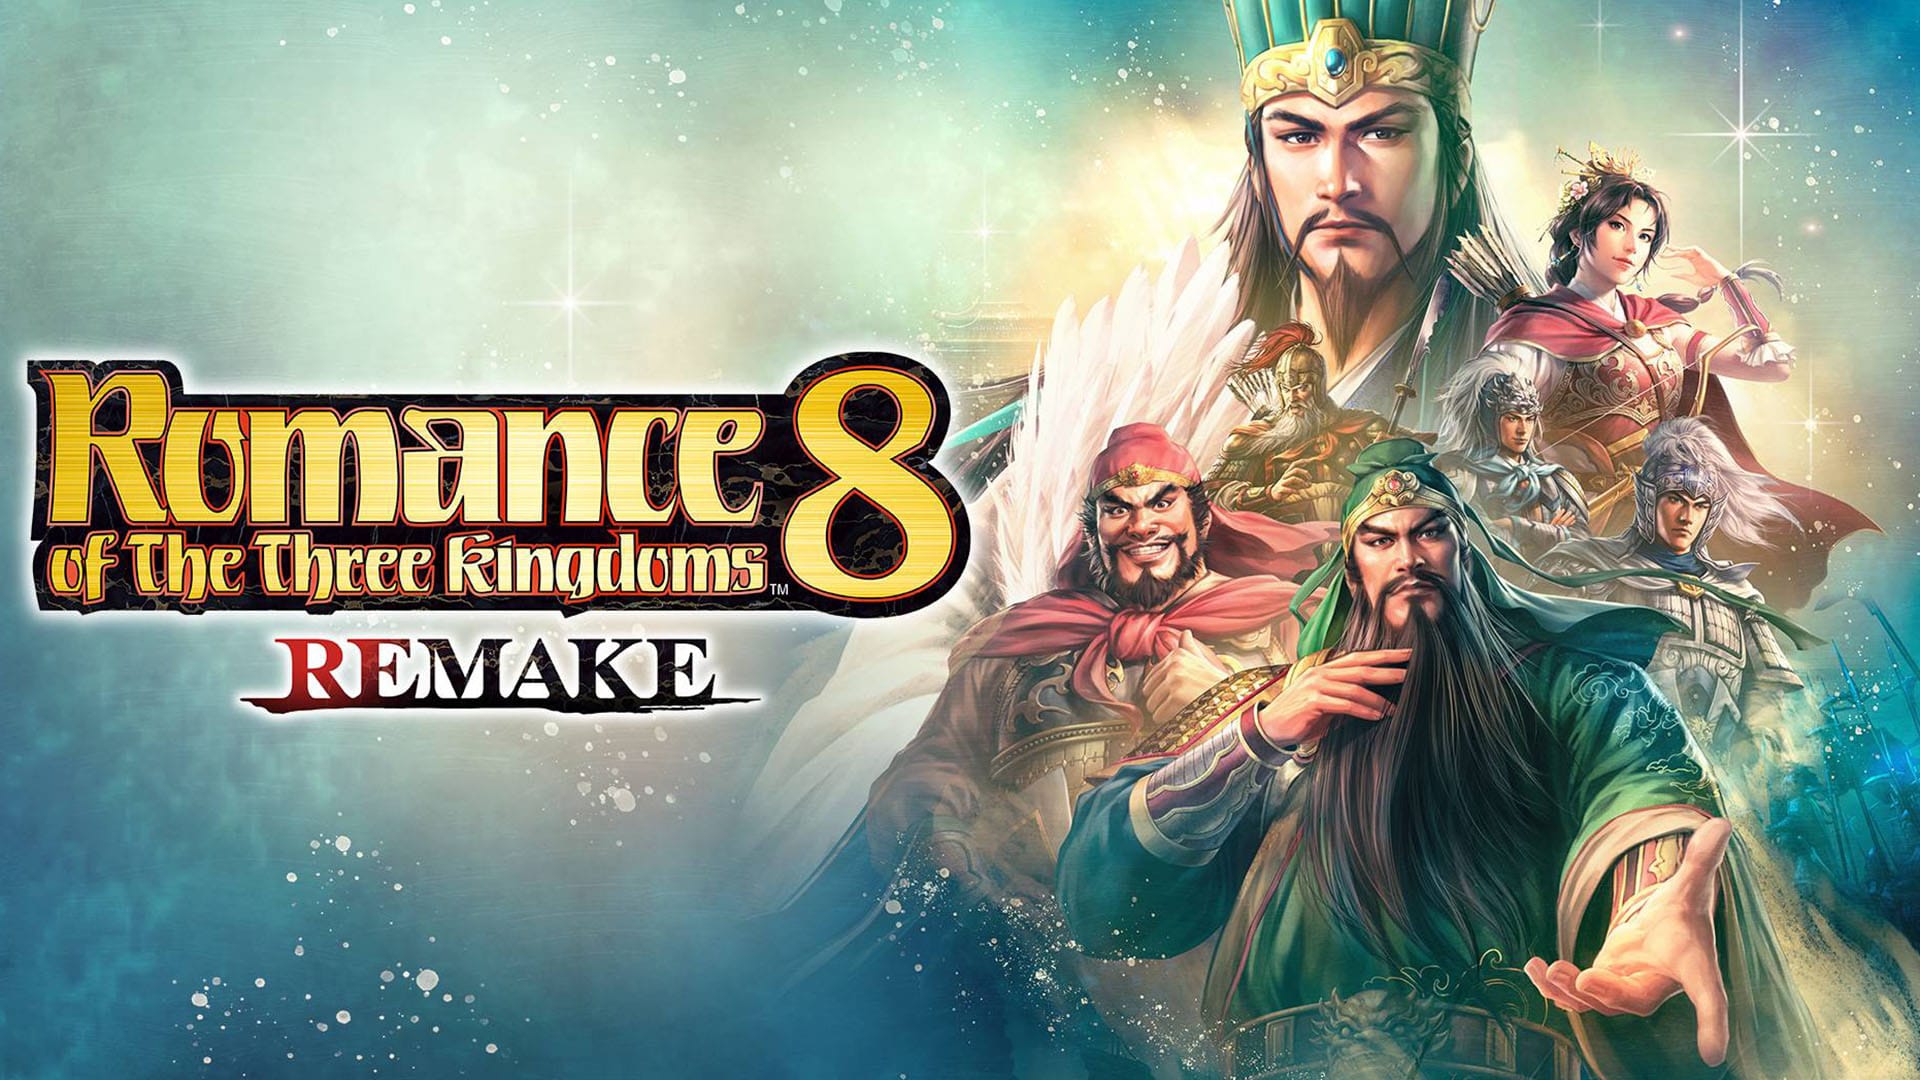 Romance of the Three Kingdoms 8 Remake Delayed to Improve Quality